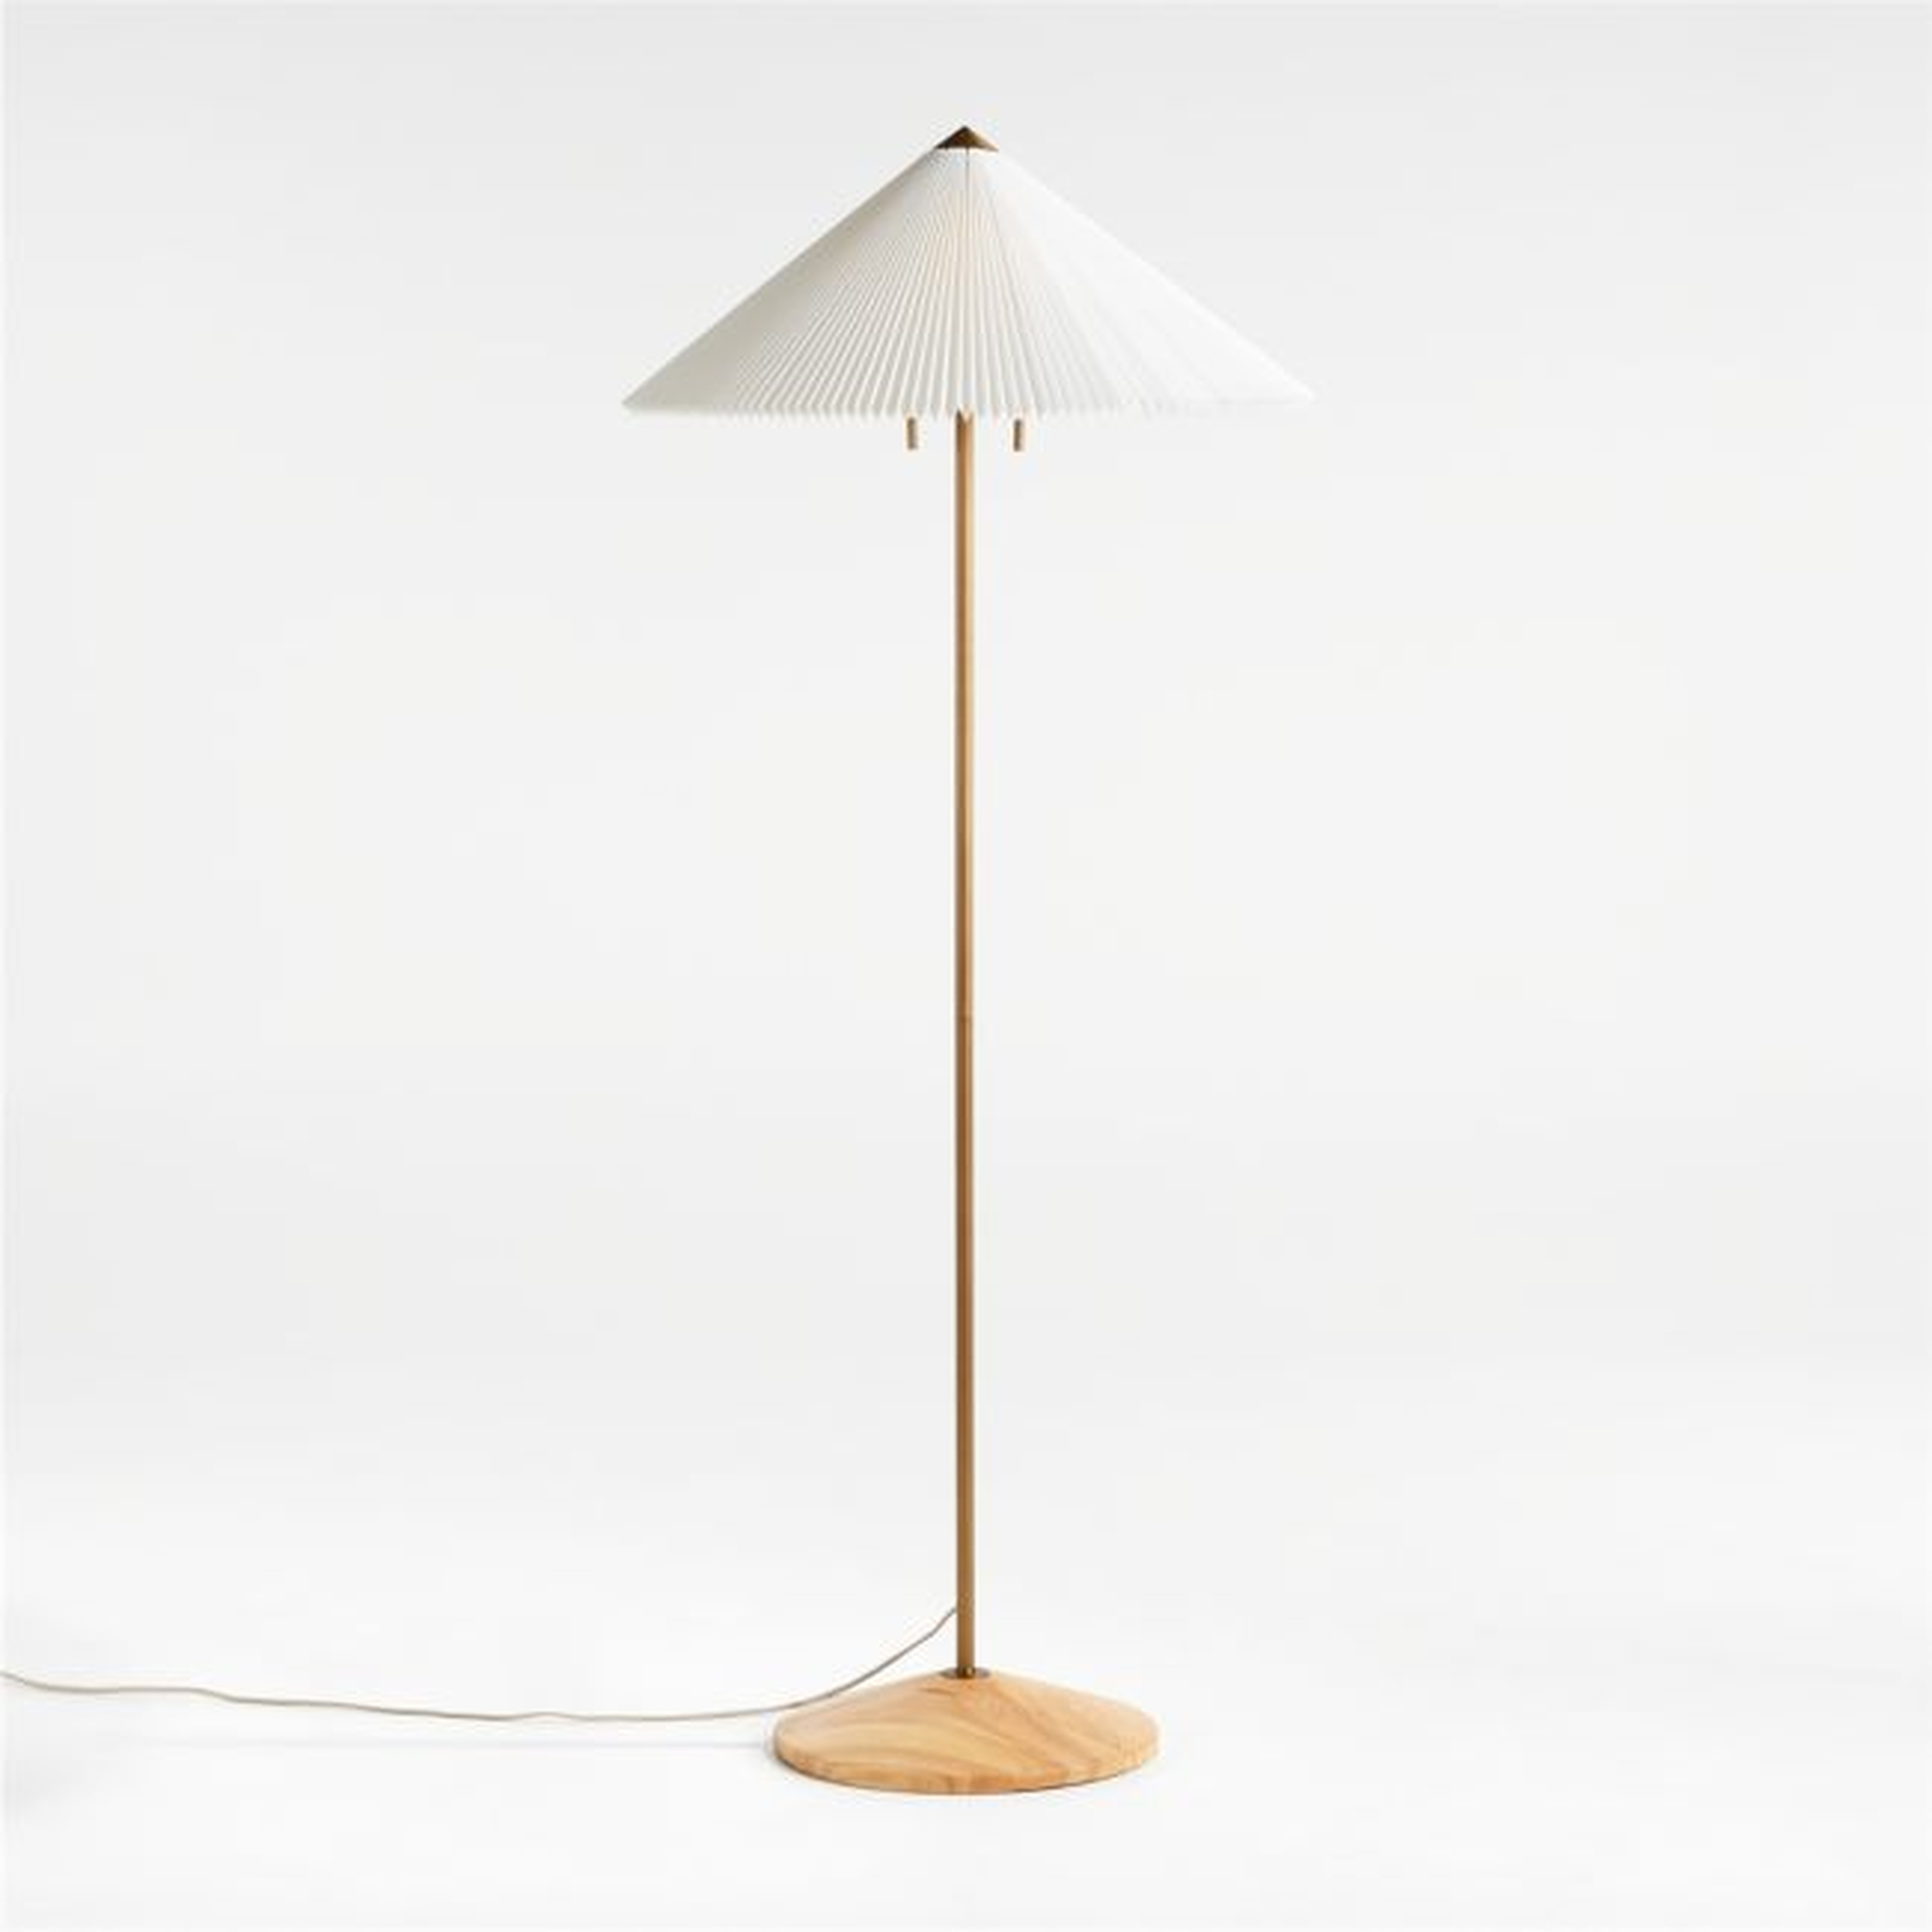 Flores Floor Lamp with Fluted Shade - Crate and Barrel